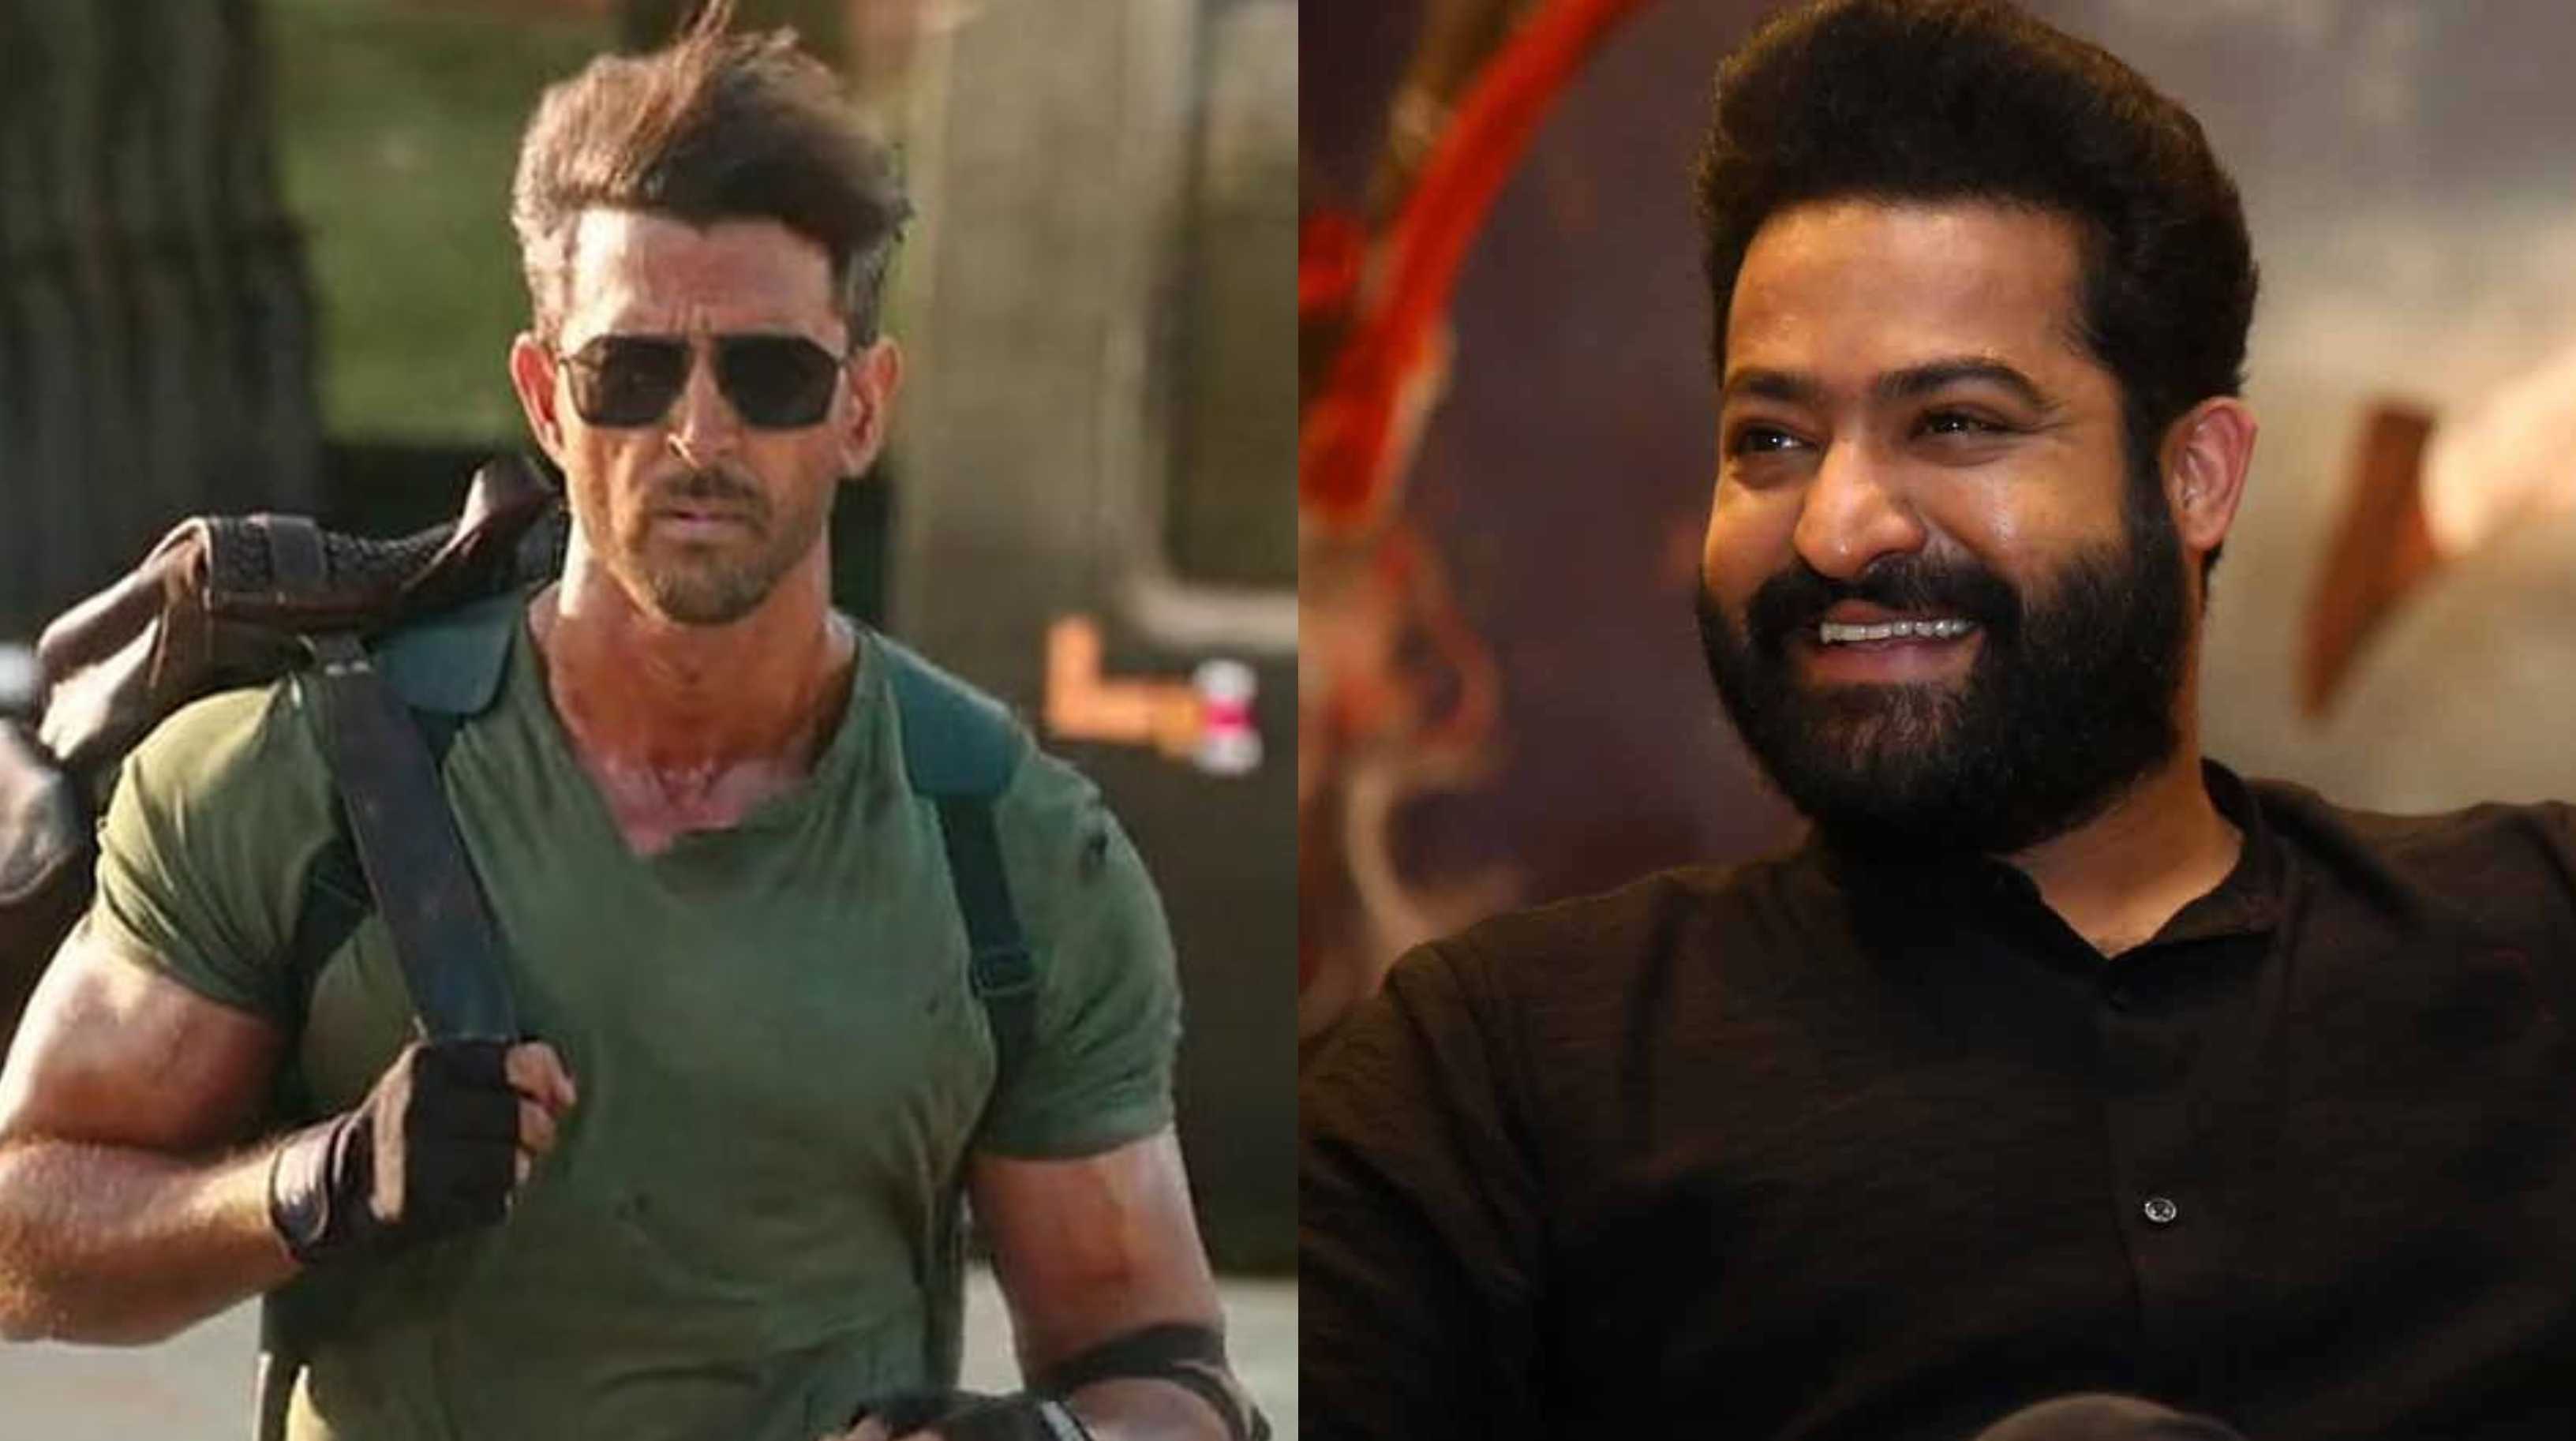 War 2: After Tiger Shroff, superstar NTR Jr. to have a showdown with Hrithik Roshan? Here’s what we know